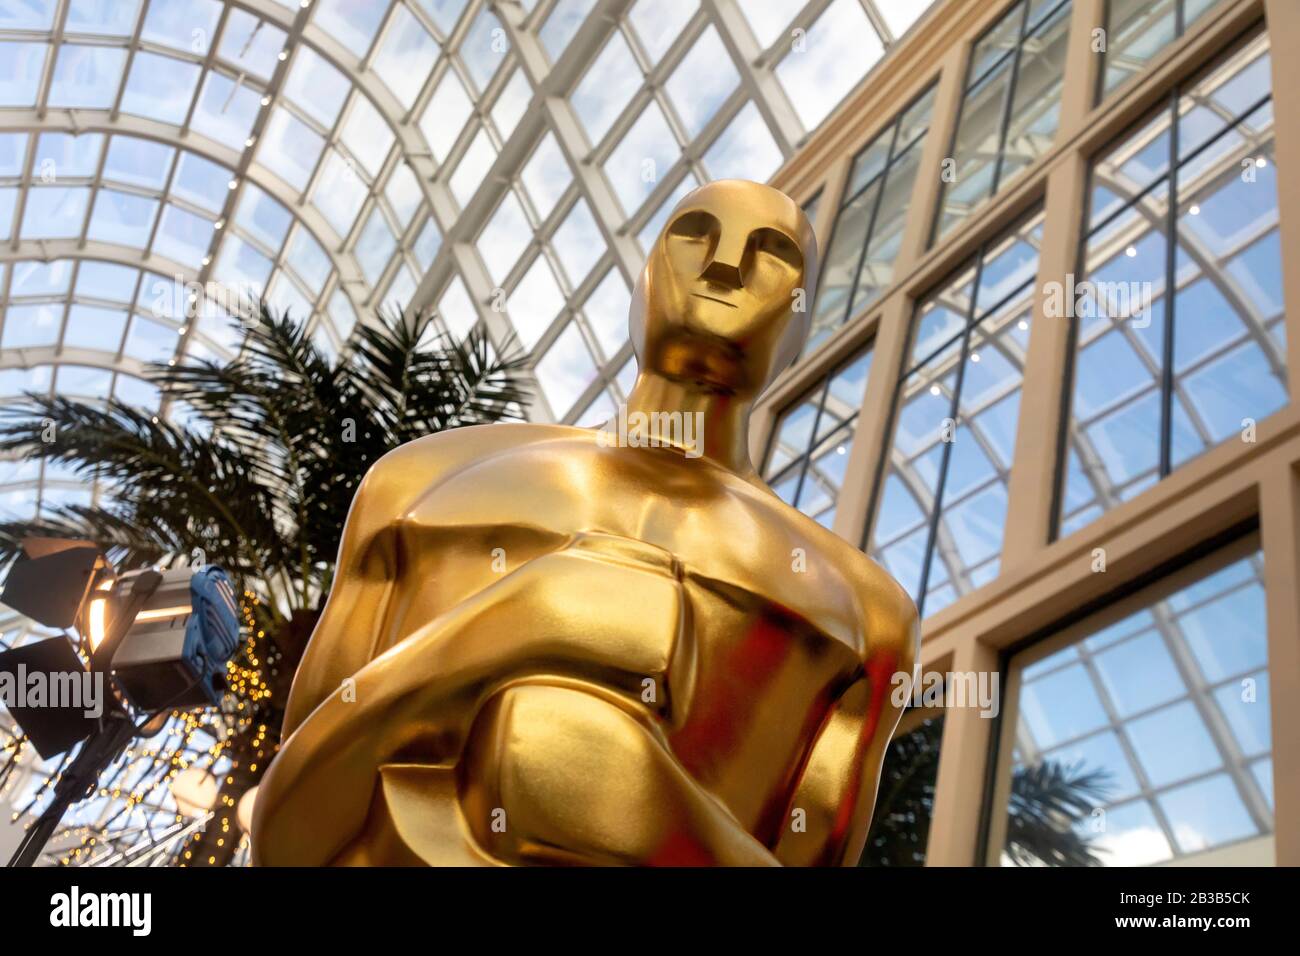 Large golden Oscar statues guard in shopping mall Stock Photo